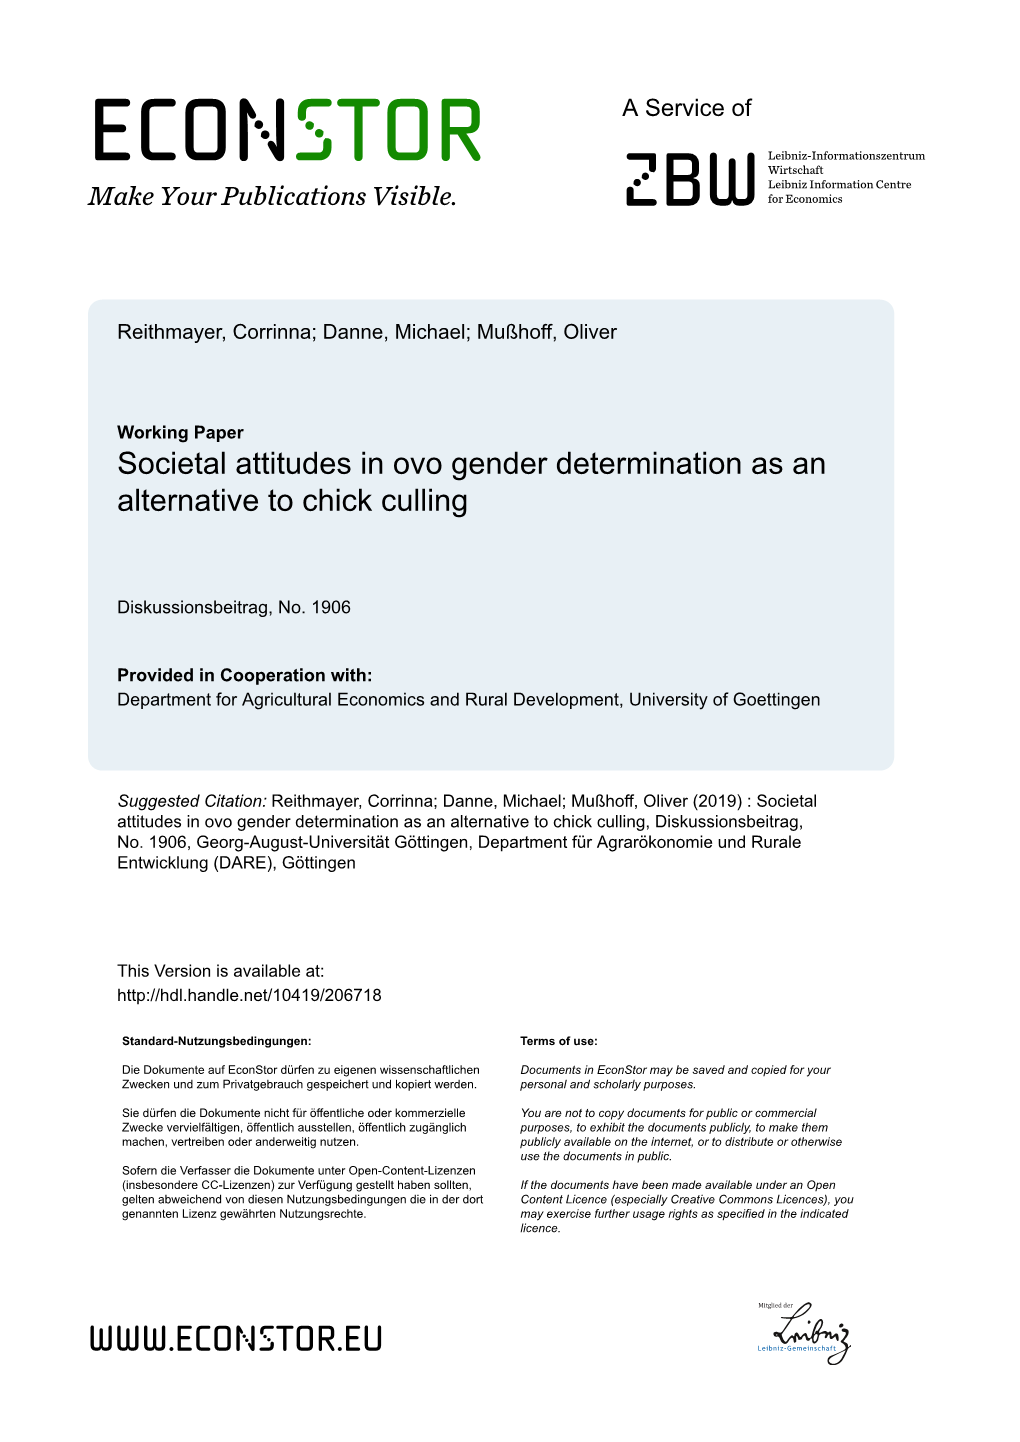 Societal Attitudes in Ovo Gender Determination As an Alternative to Chick Culling